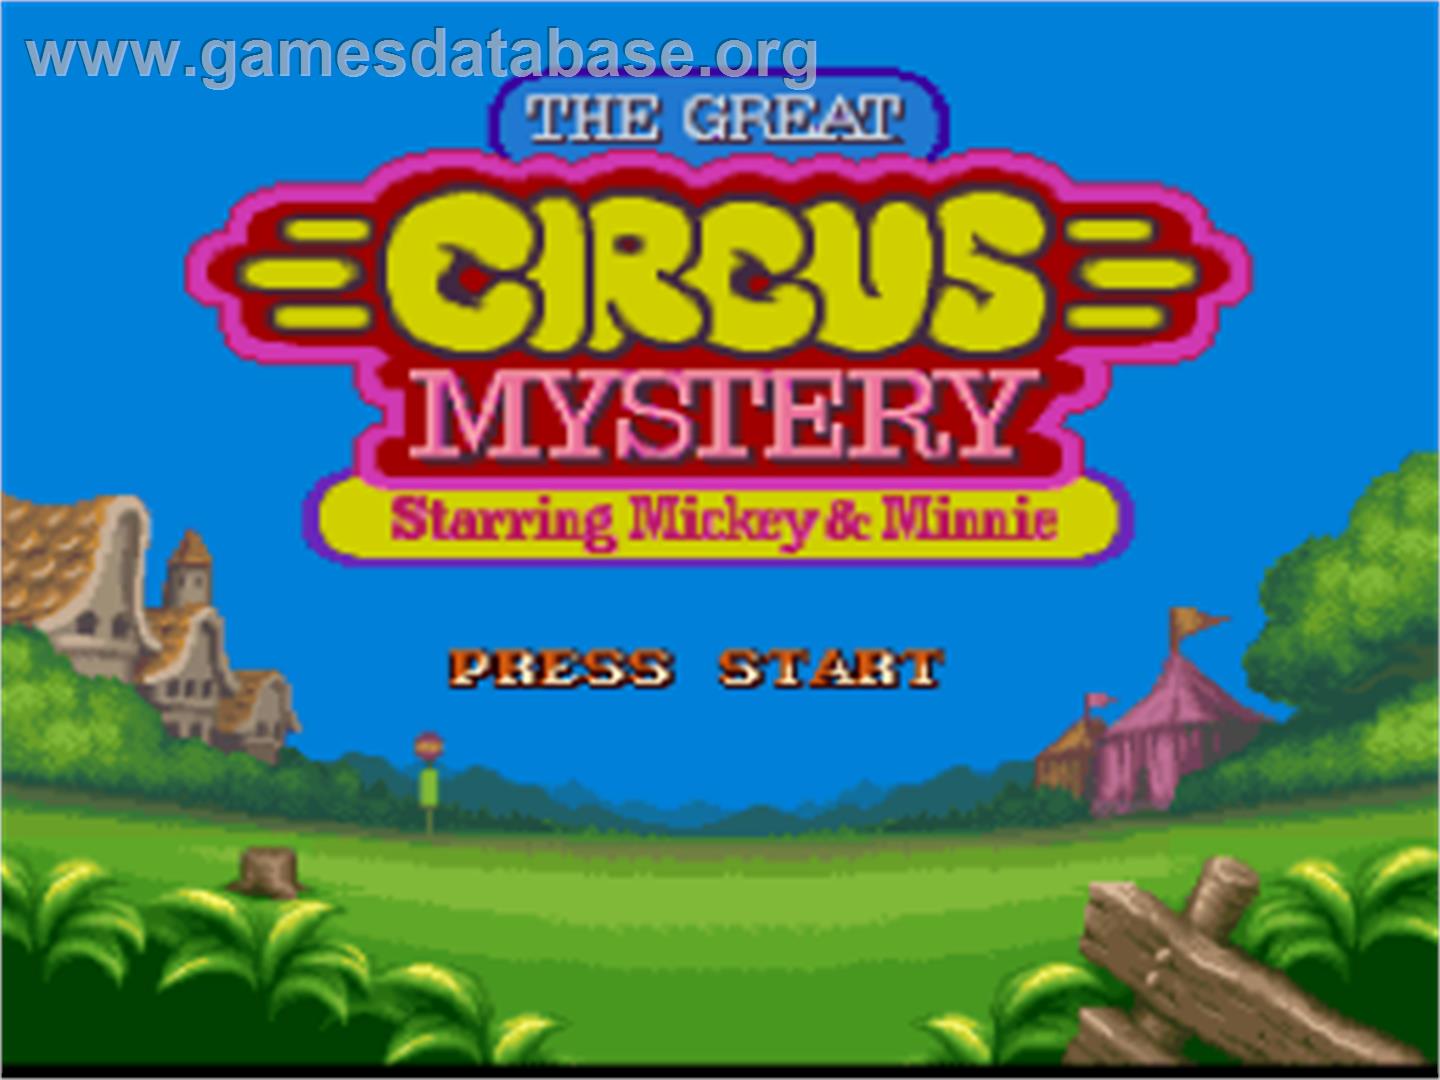 The Great Circus Mystery starring Mickey and Minnie Mouse - Nintendo SNES - Artwork - Title Screen